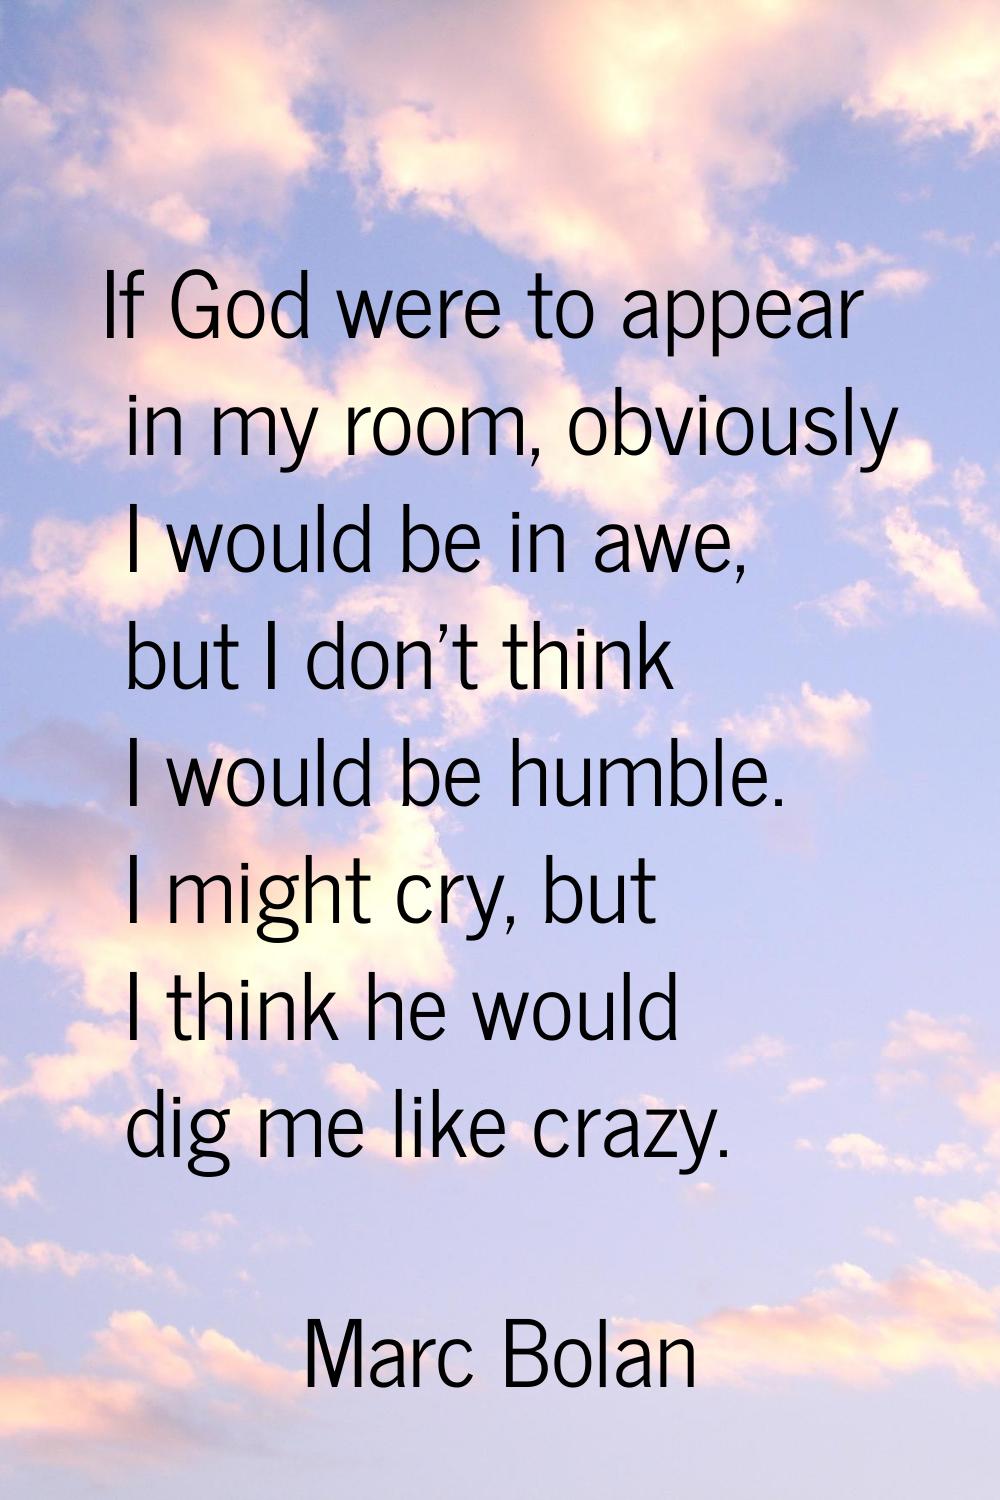 If God were to appear in my room, obviously I would be in awe, but I don't think I would be humble.